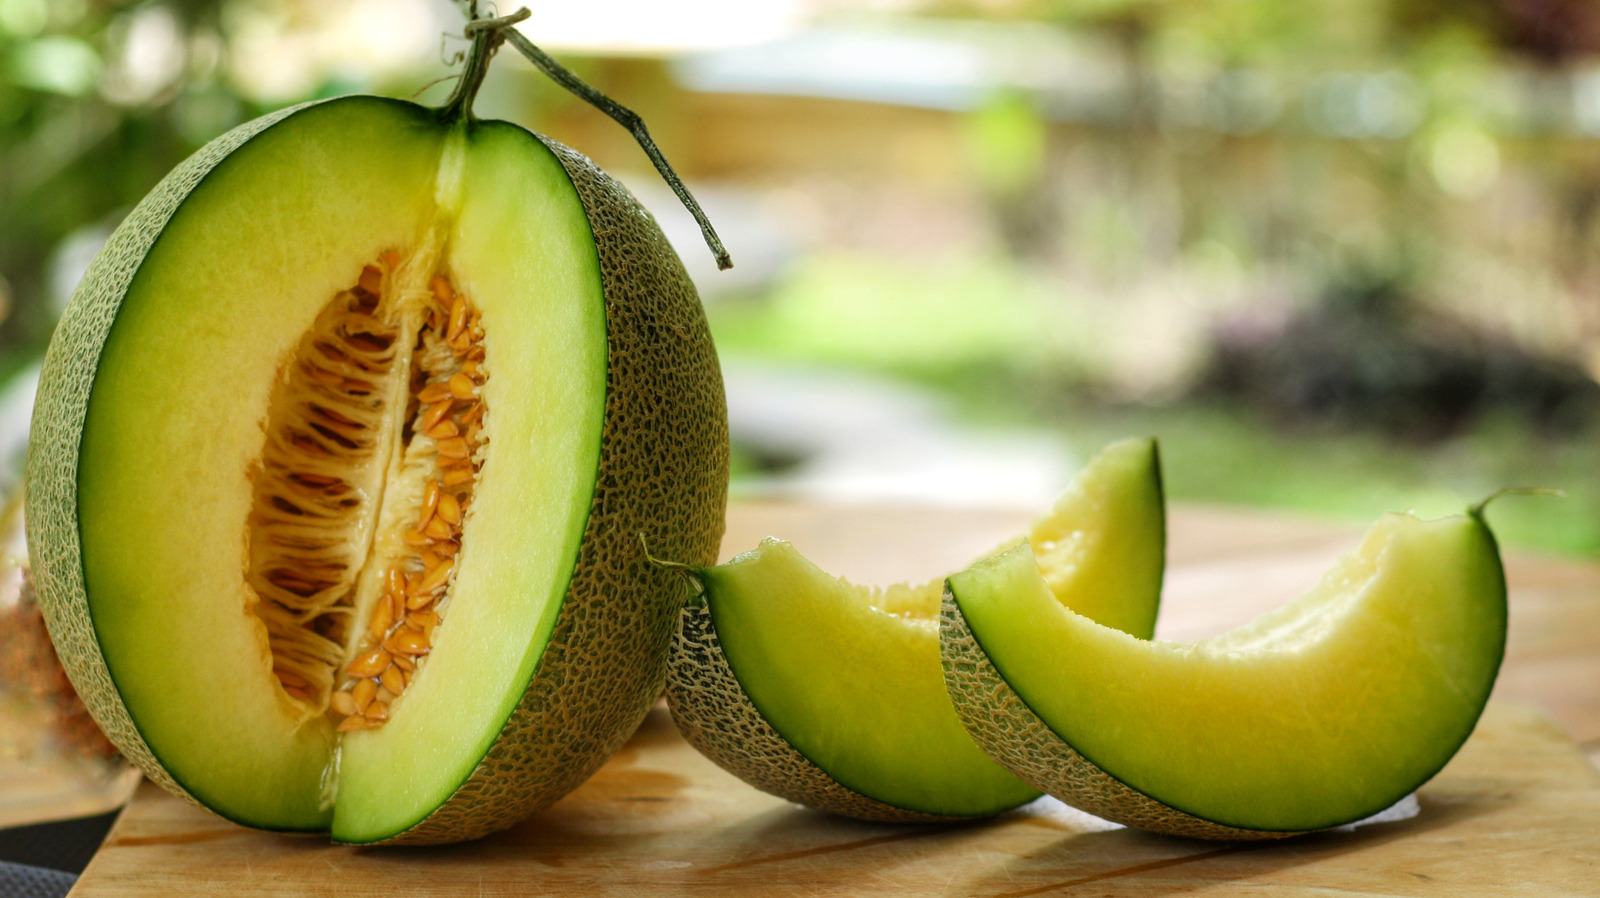 Why You Should Eat More Honeydew